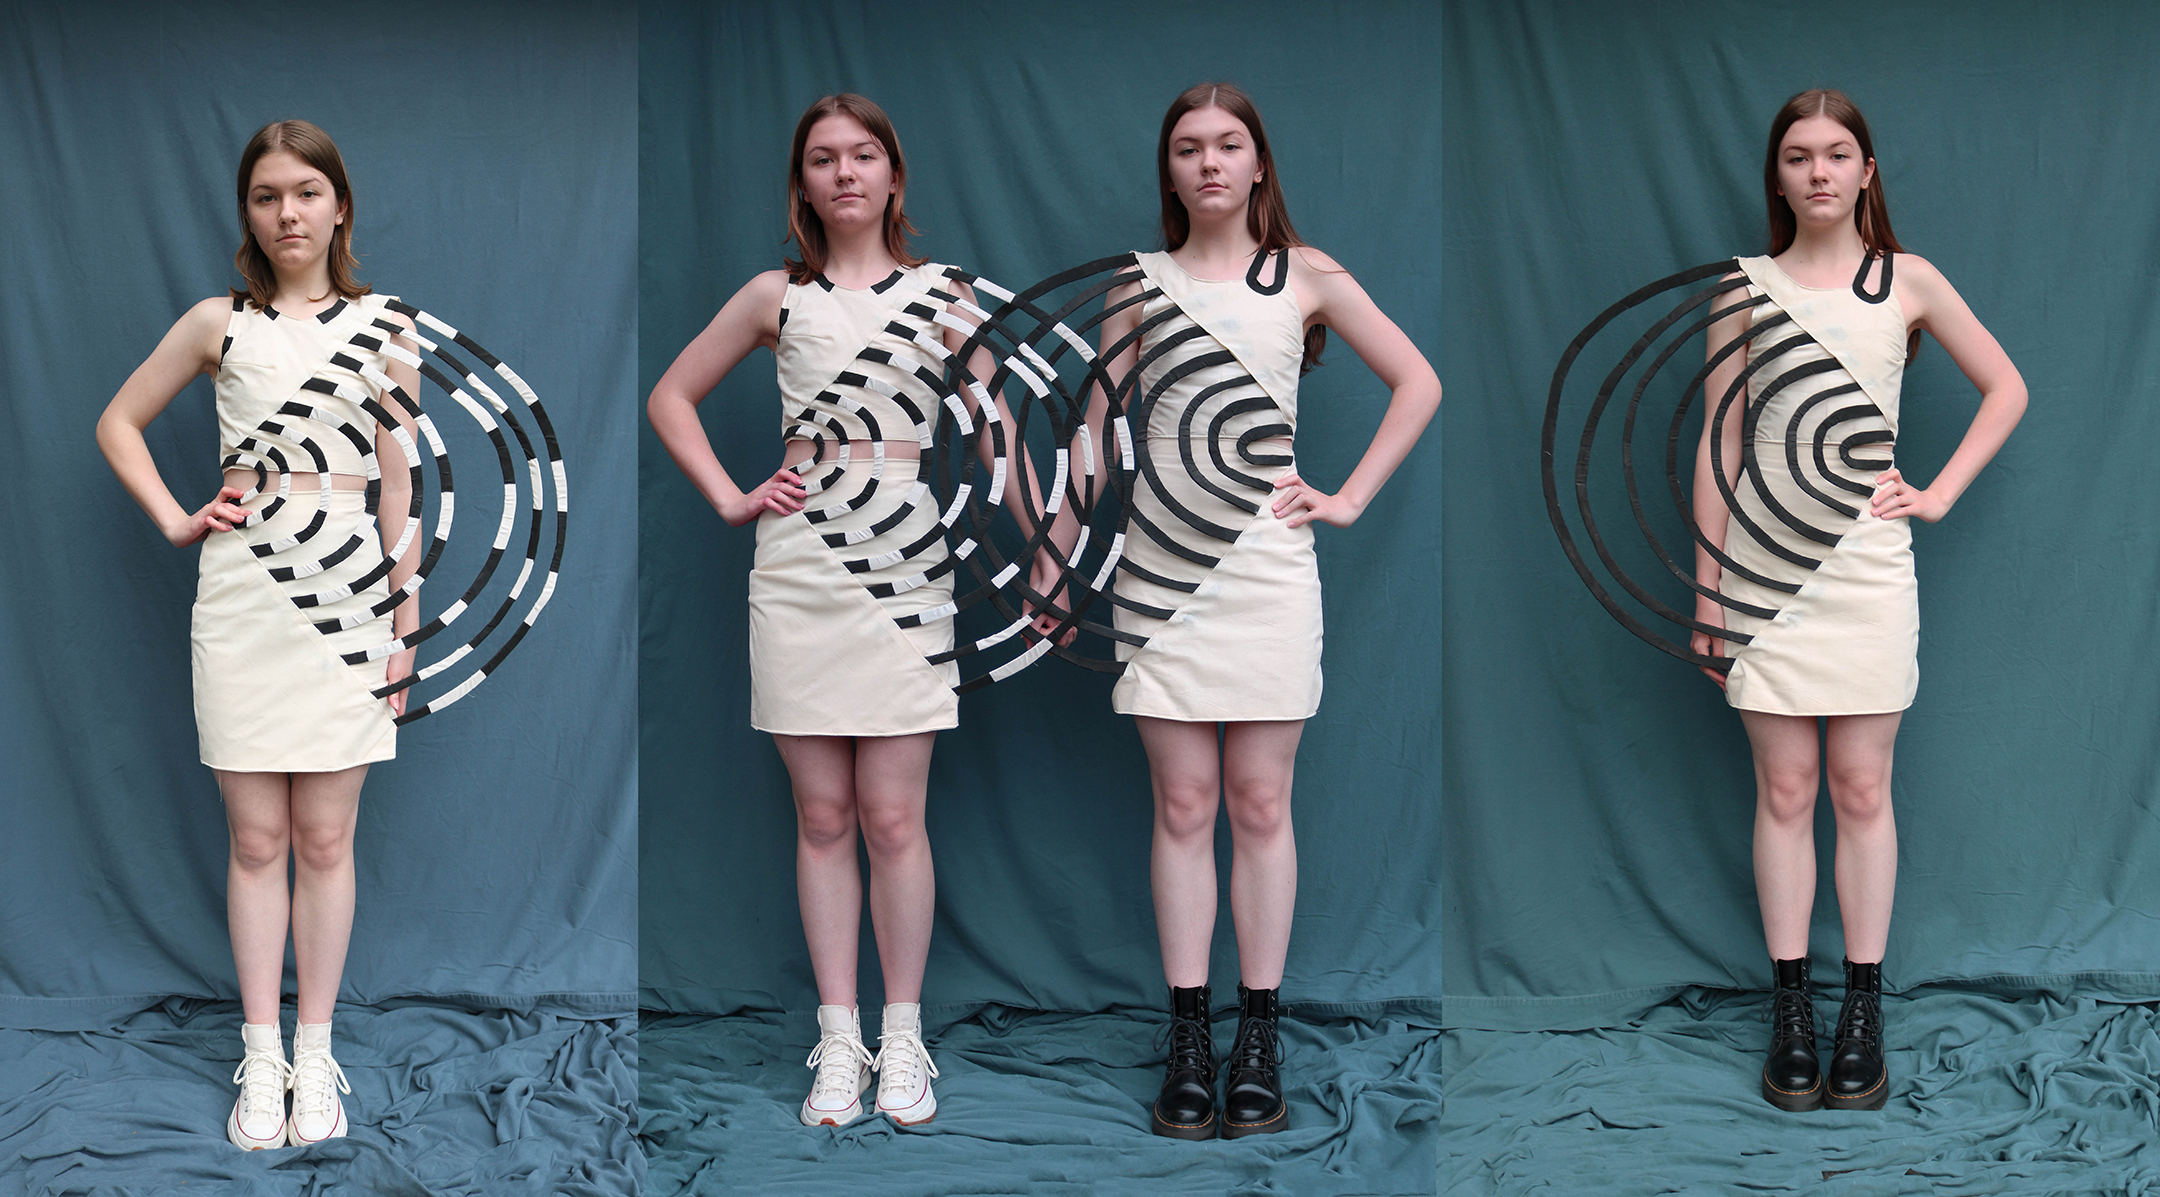 Four photos of a young woman in a white dress with a black quarter-circle structural element attached